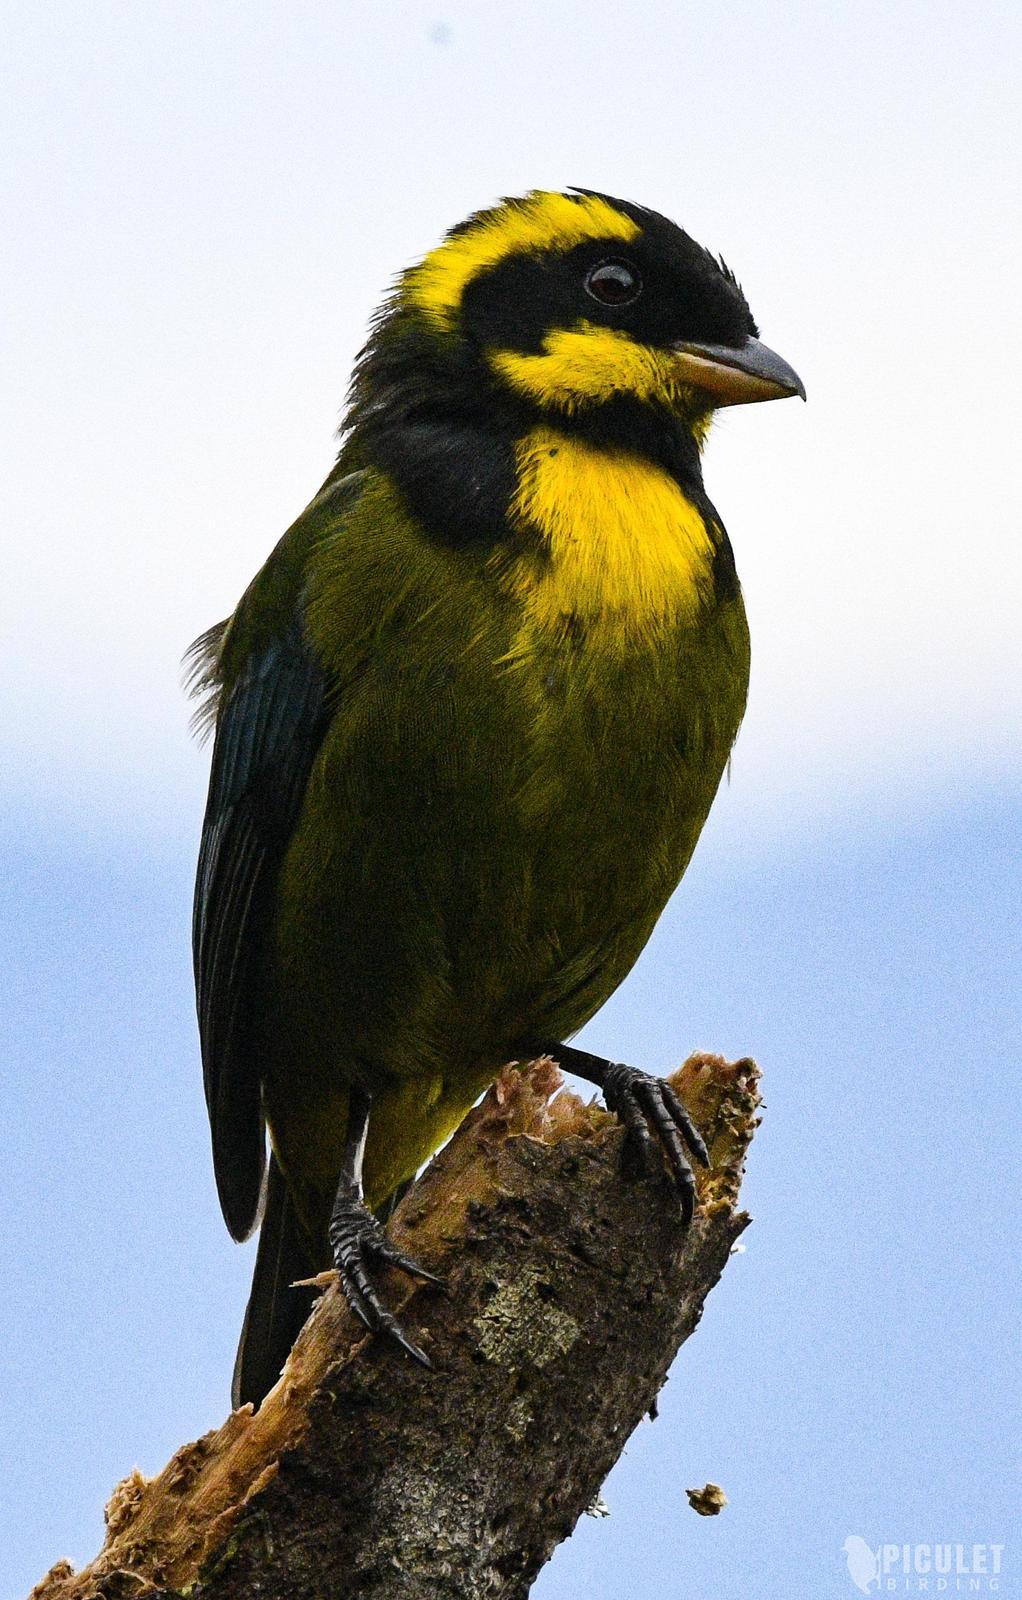 Gold-ringed Tanager Photo by Julio Delgado